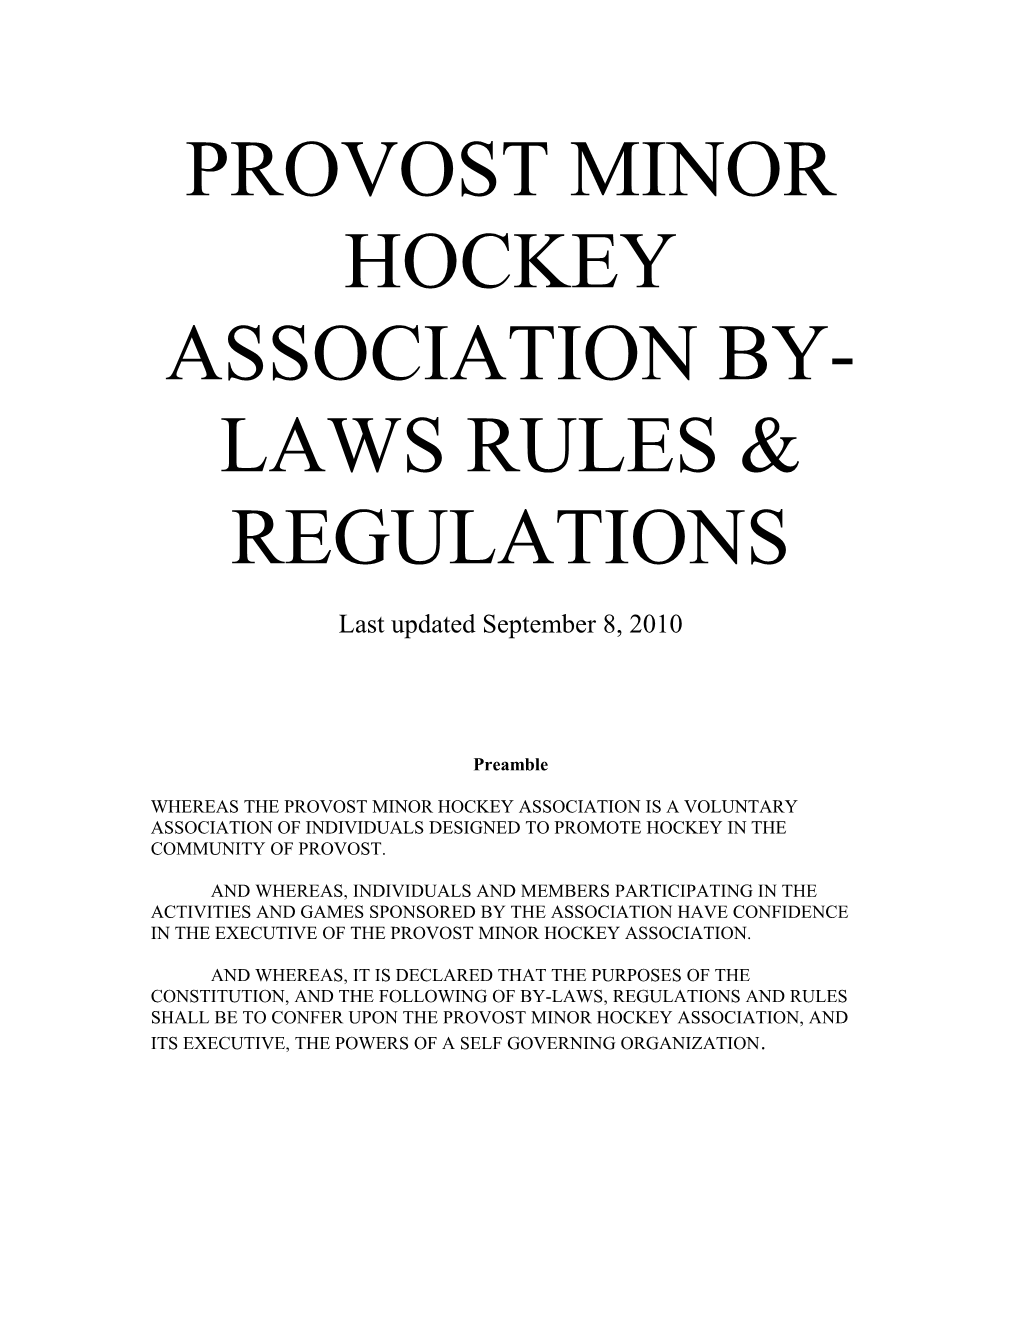 Provost Minor Hockey Association By-Laws Rules & Regulations